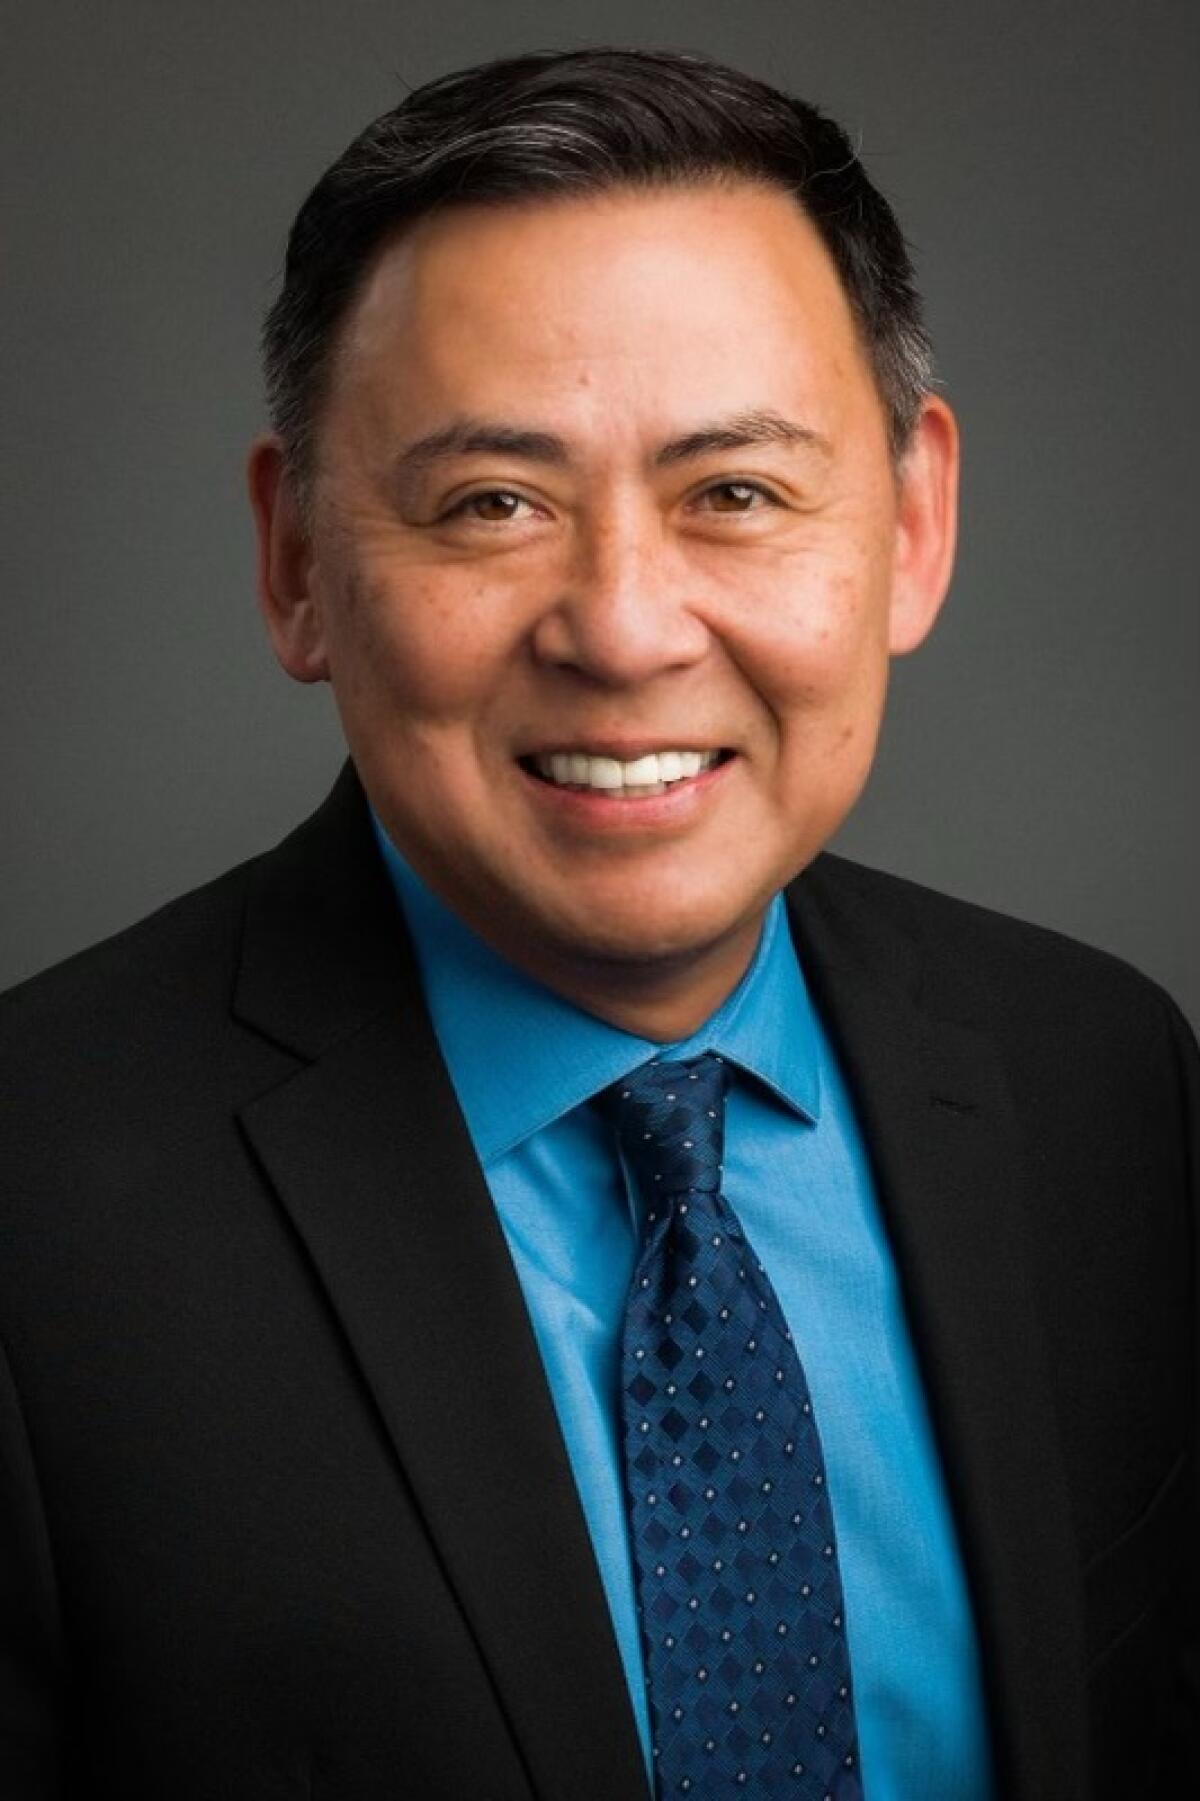 Newport-Mesa Unified School District Supt. Russell Lee-Sung retired in August, halfway into a two-year contract. 